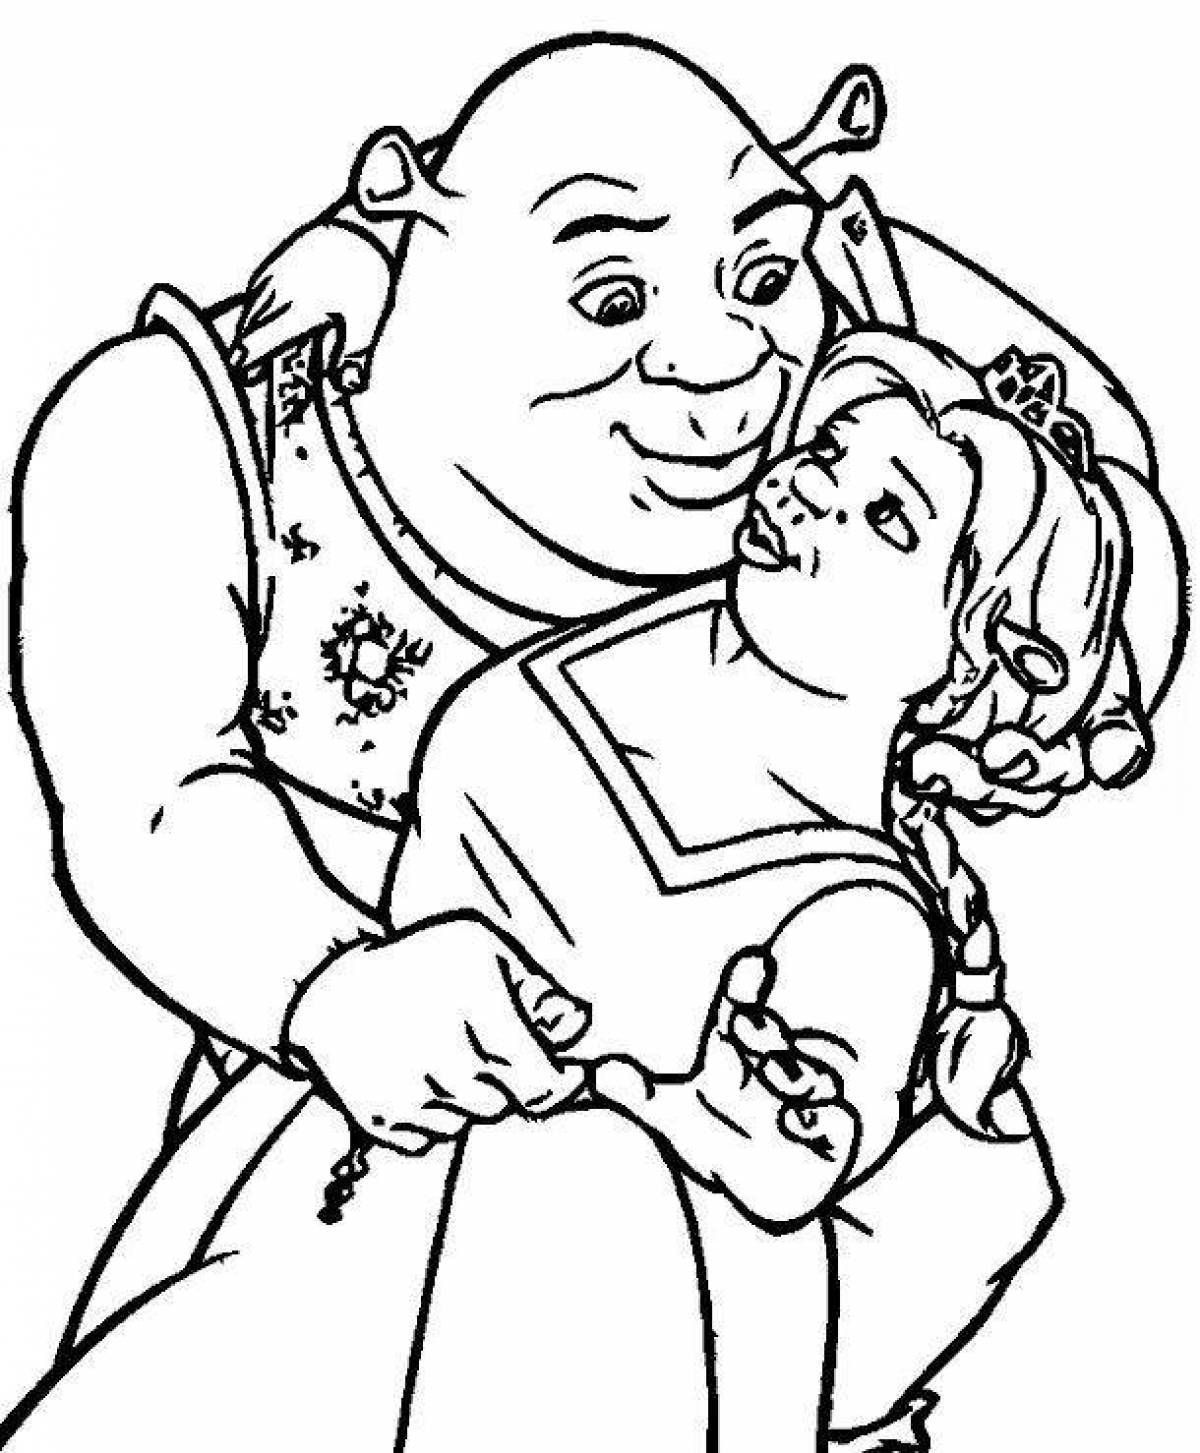 Shrek and fiona funny coloring book